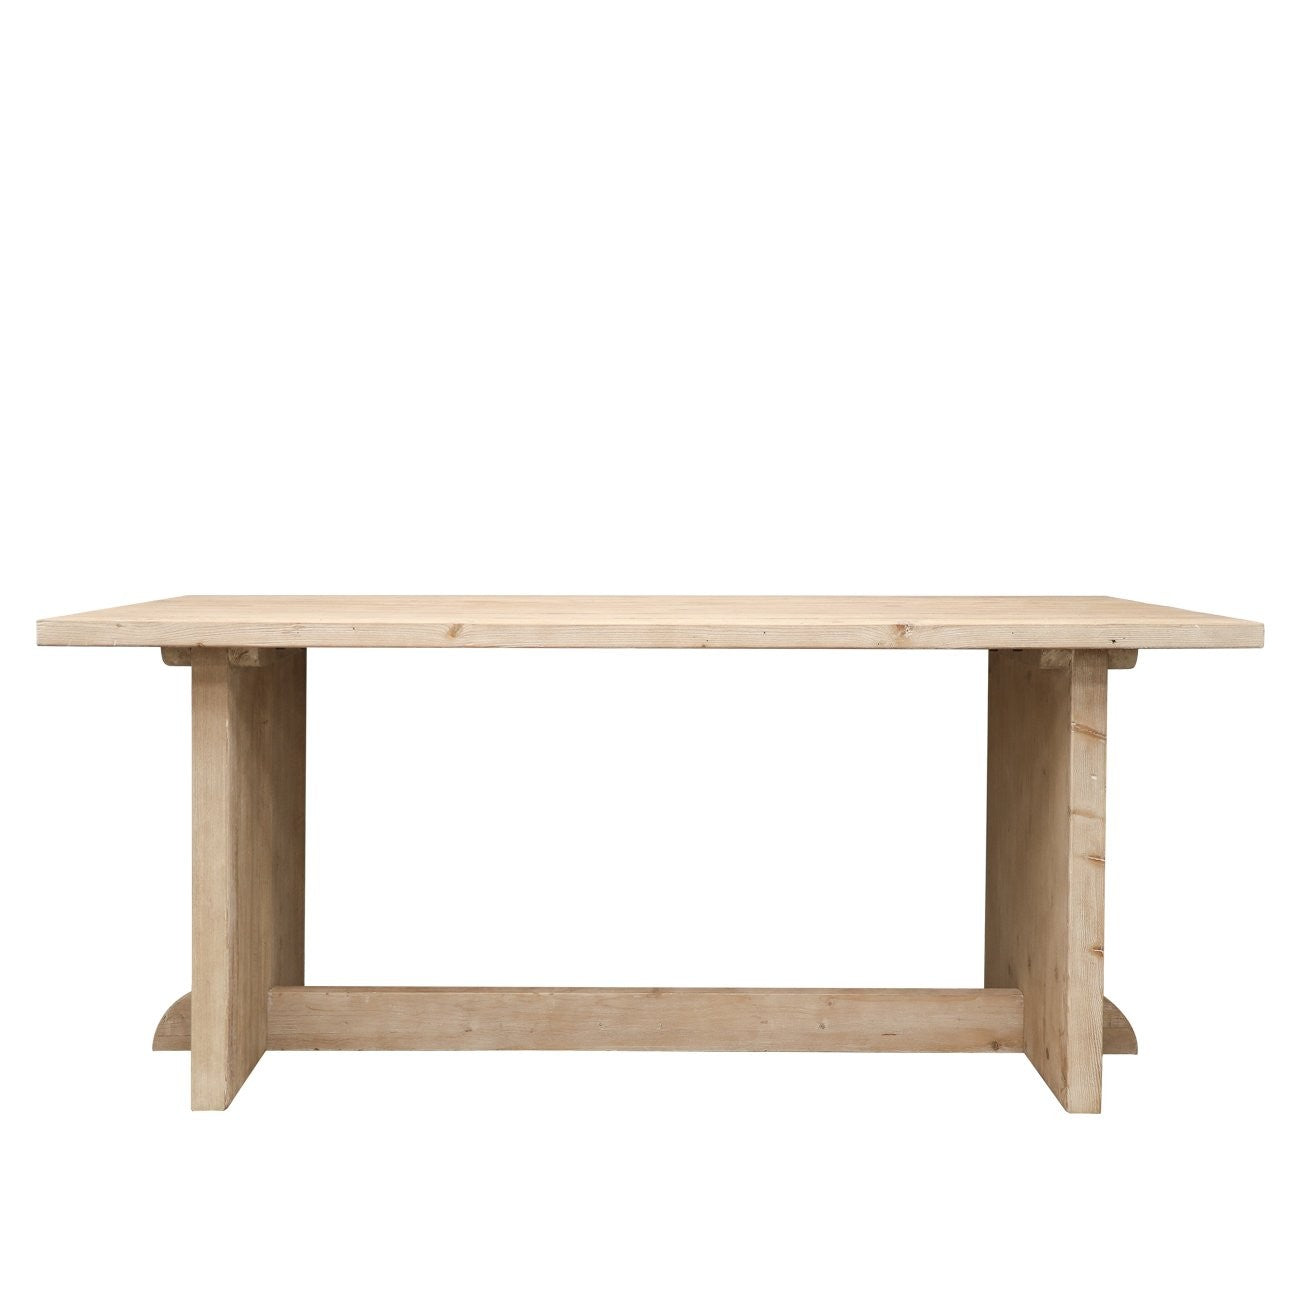 Haverford Dining Table - 1.8 Metre